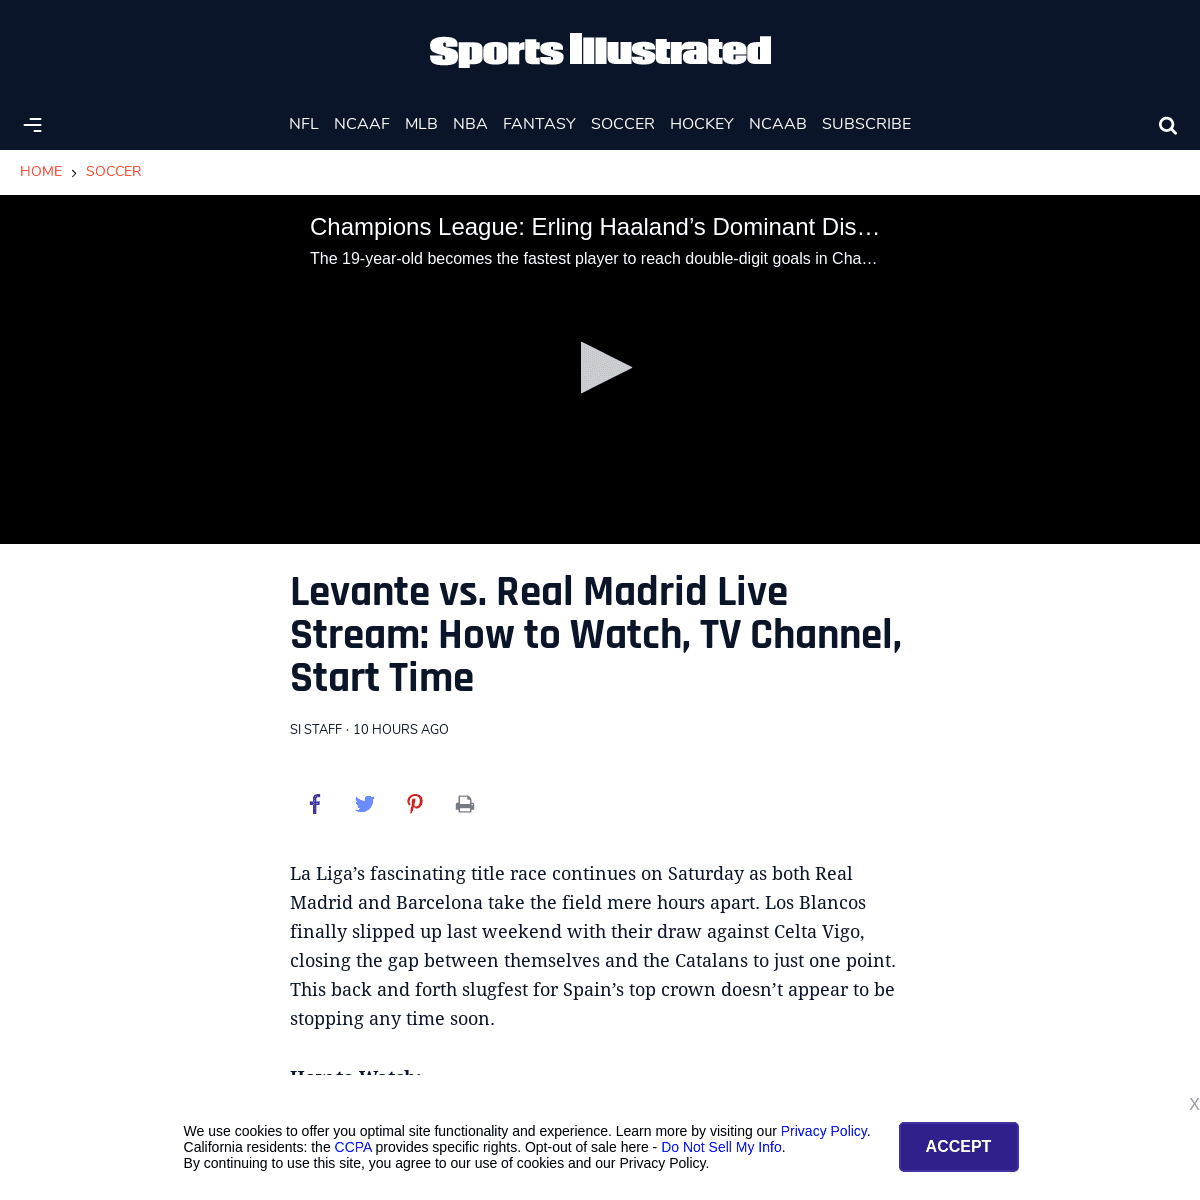 A complete backup of www.si.com/soccer/2020/02/22/real-madrid-levante-live-stream-how-to-watch-tv-channel-time